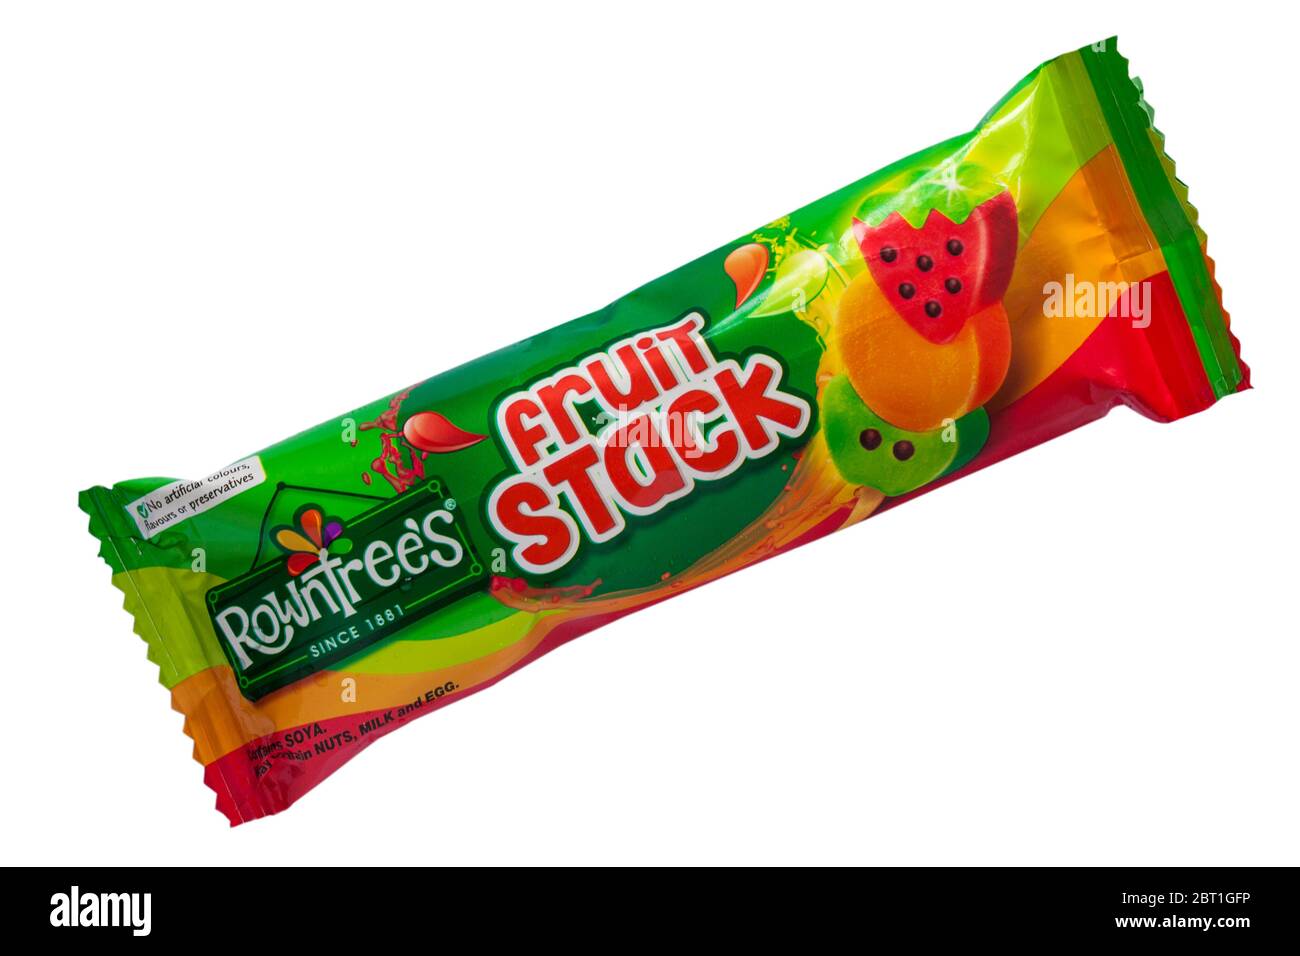 Rowntrees Fruit Stack ice lolly isolated on white background - Apple, orange and strawberry fruit ice with chocolate flavoured pieces Stock Photo